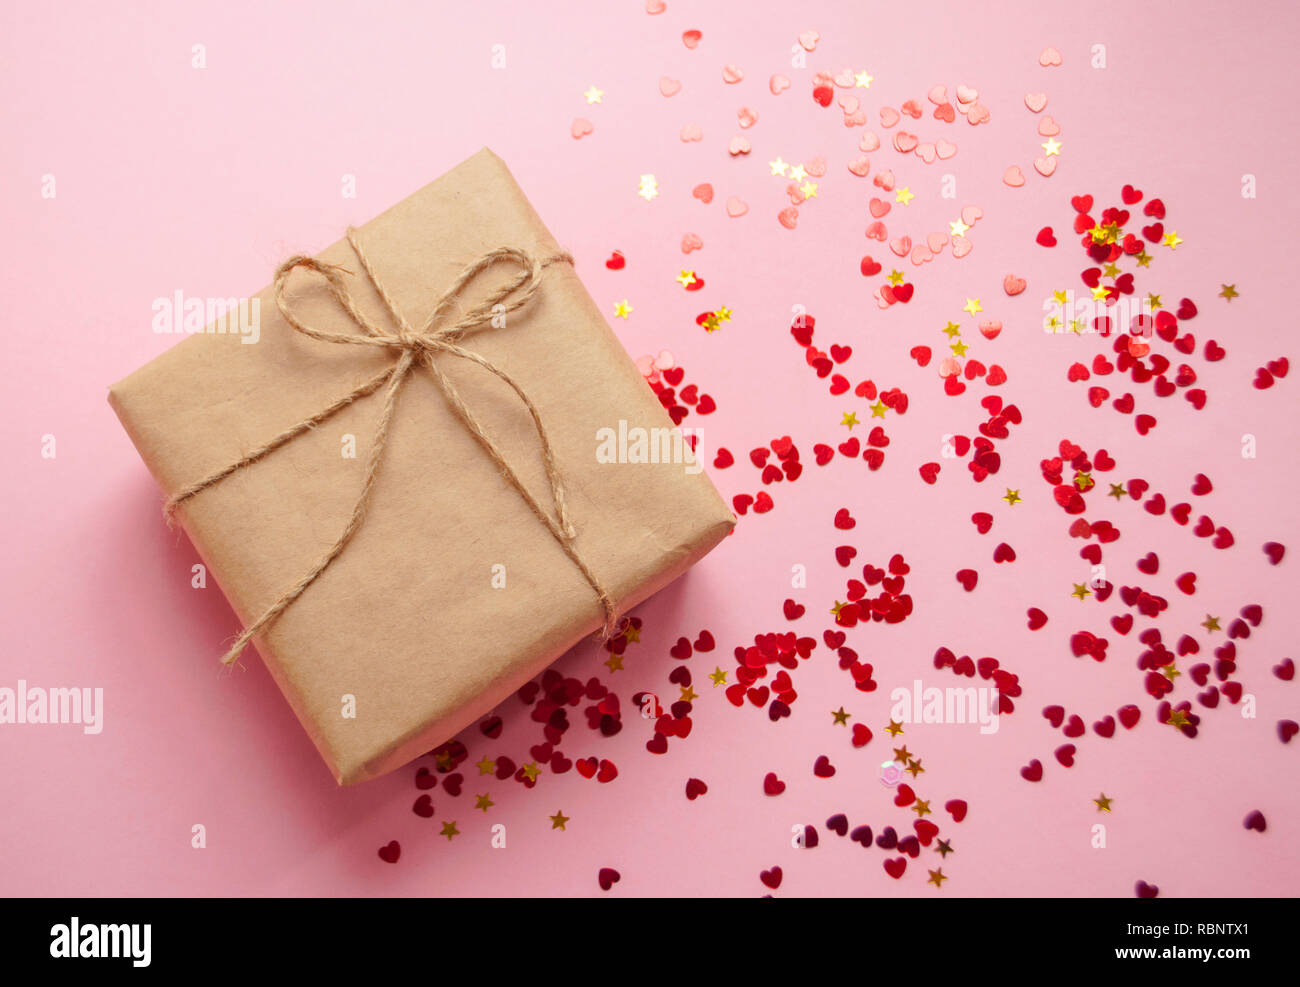 Gift box wrapped in brown colored craft paper and tied with rope on pink background with heart shape red confetti. Stock Photo